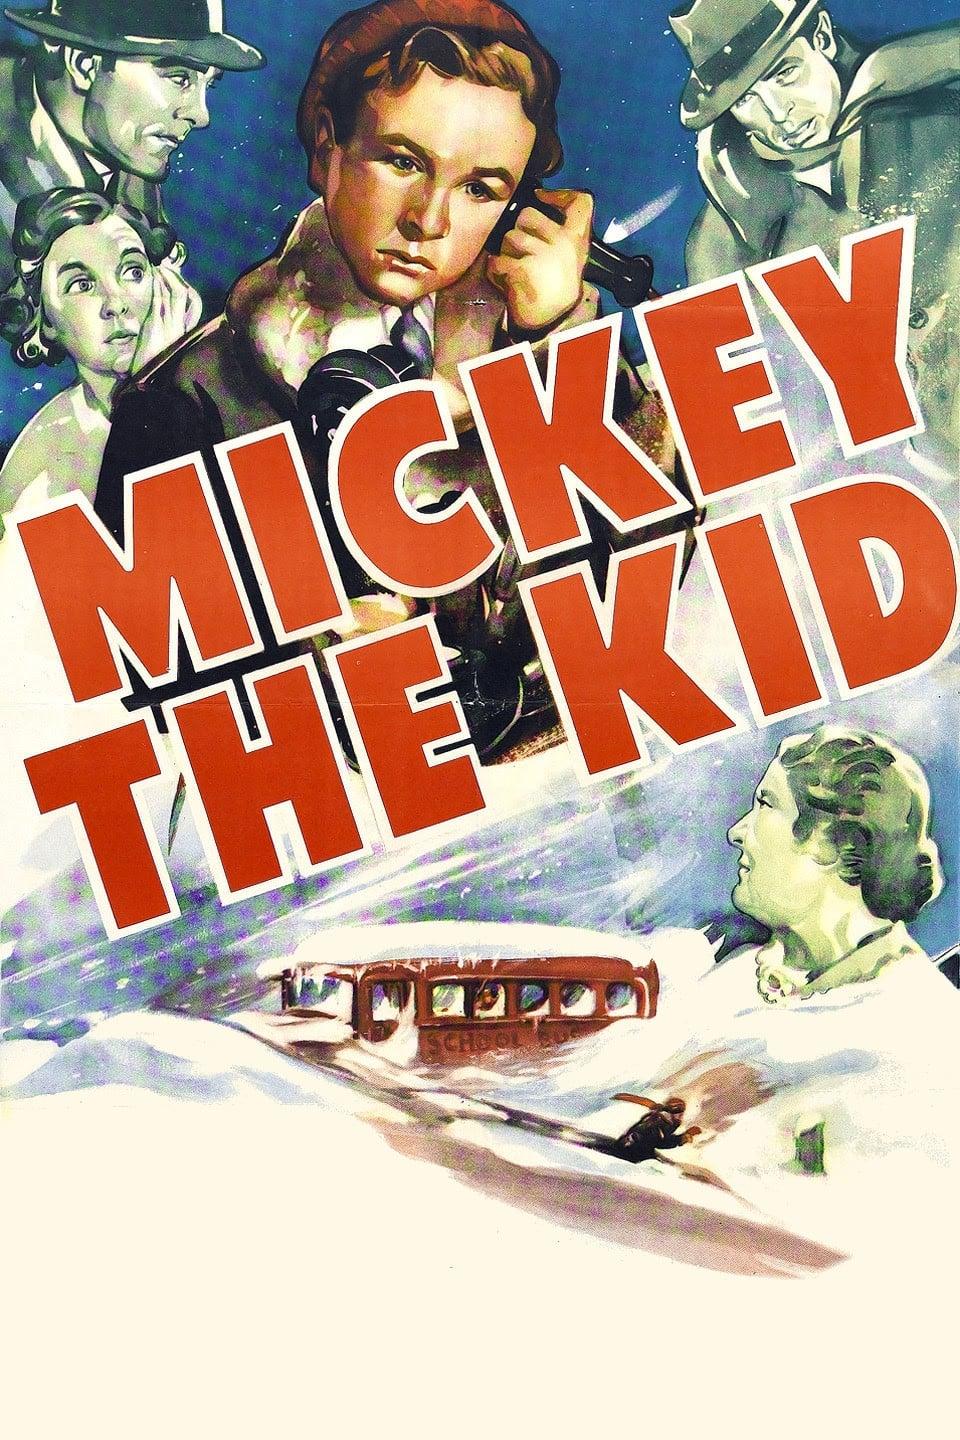 Mickey the Kid poster